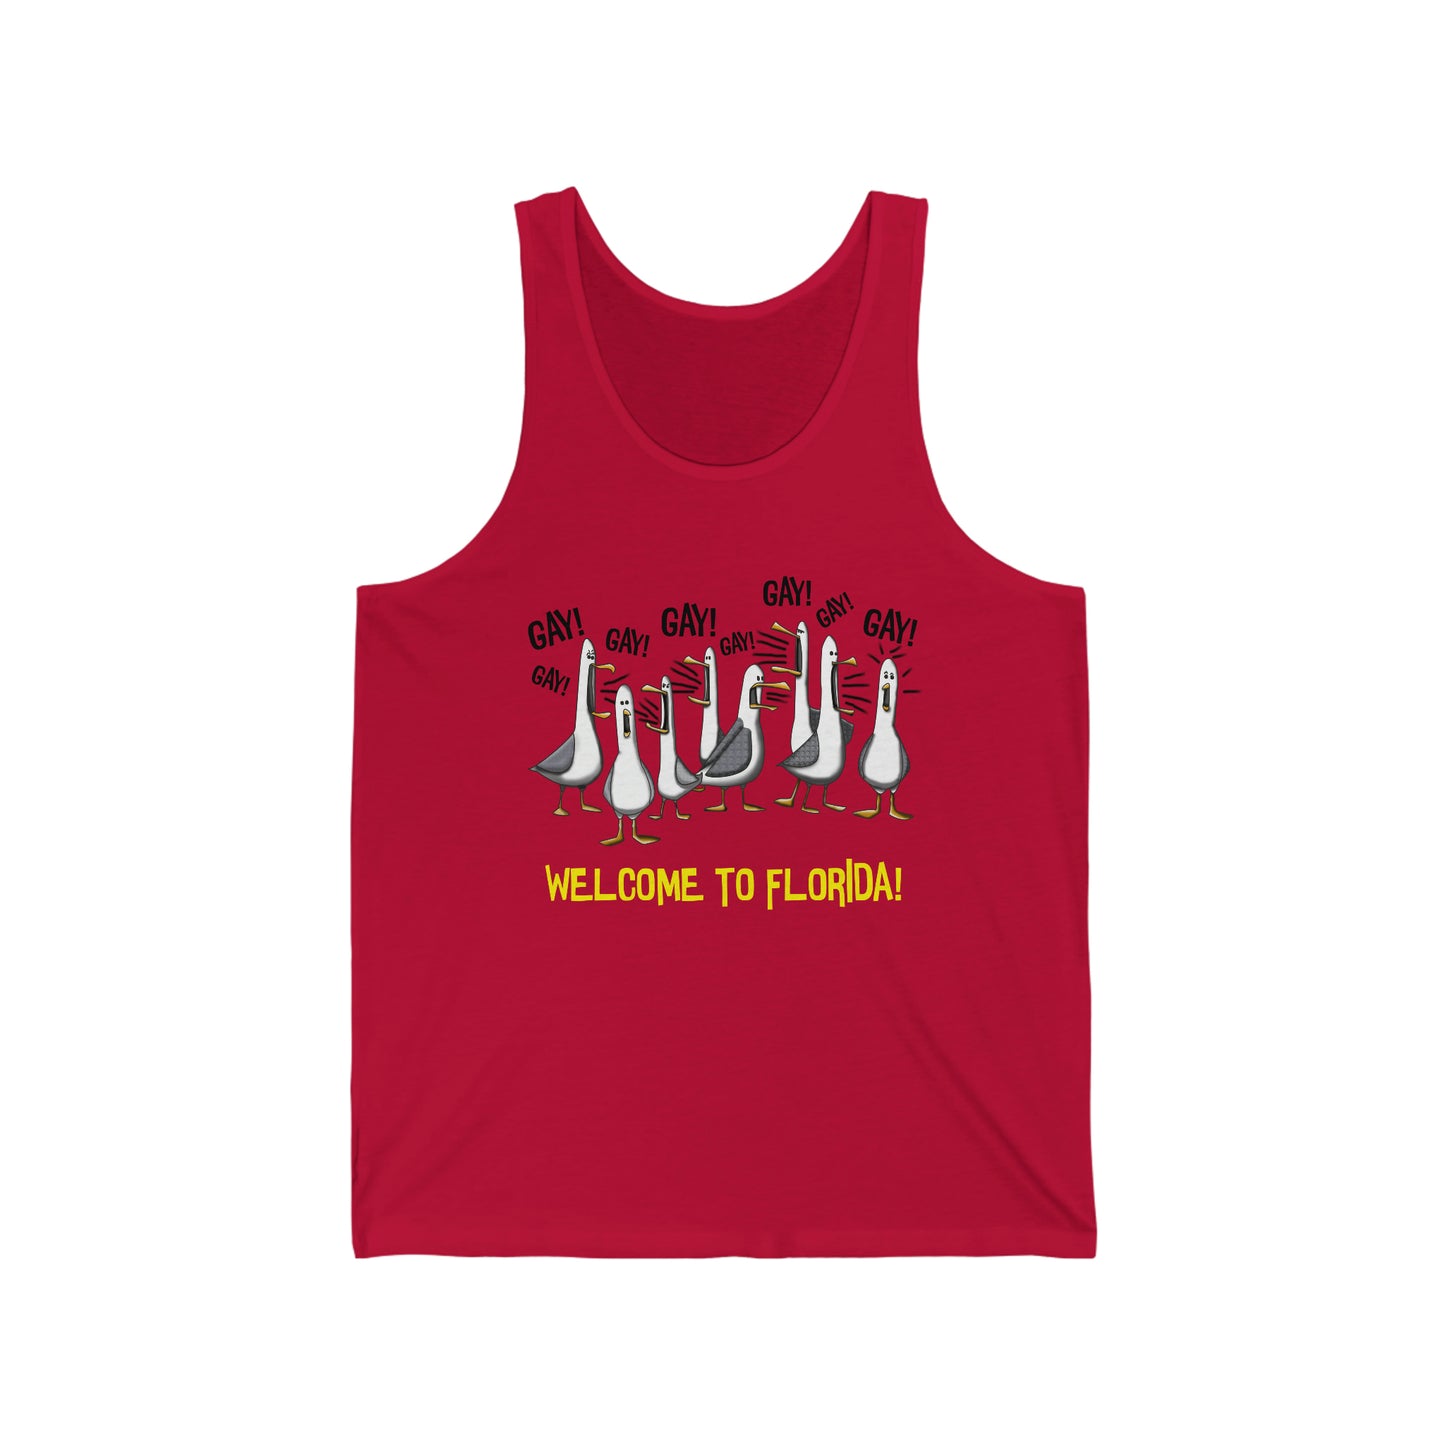 Screaming GAY! Seagulls - Welcome to Florida! Adult Unisex Tank Top